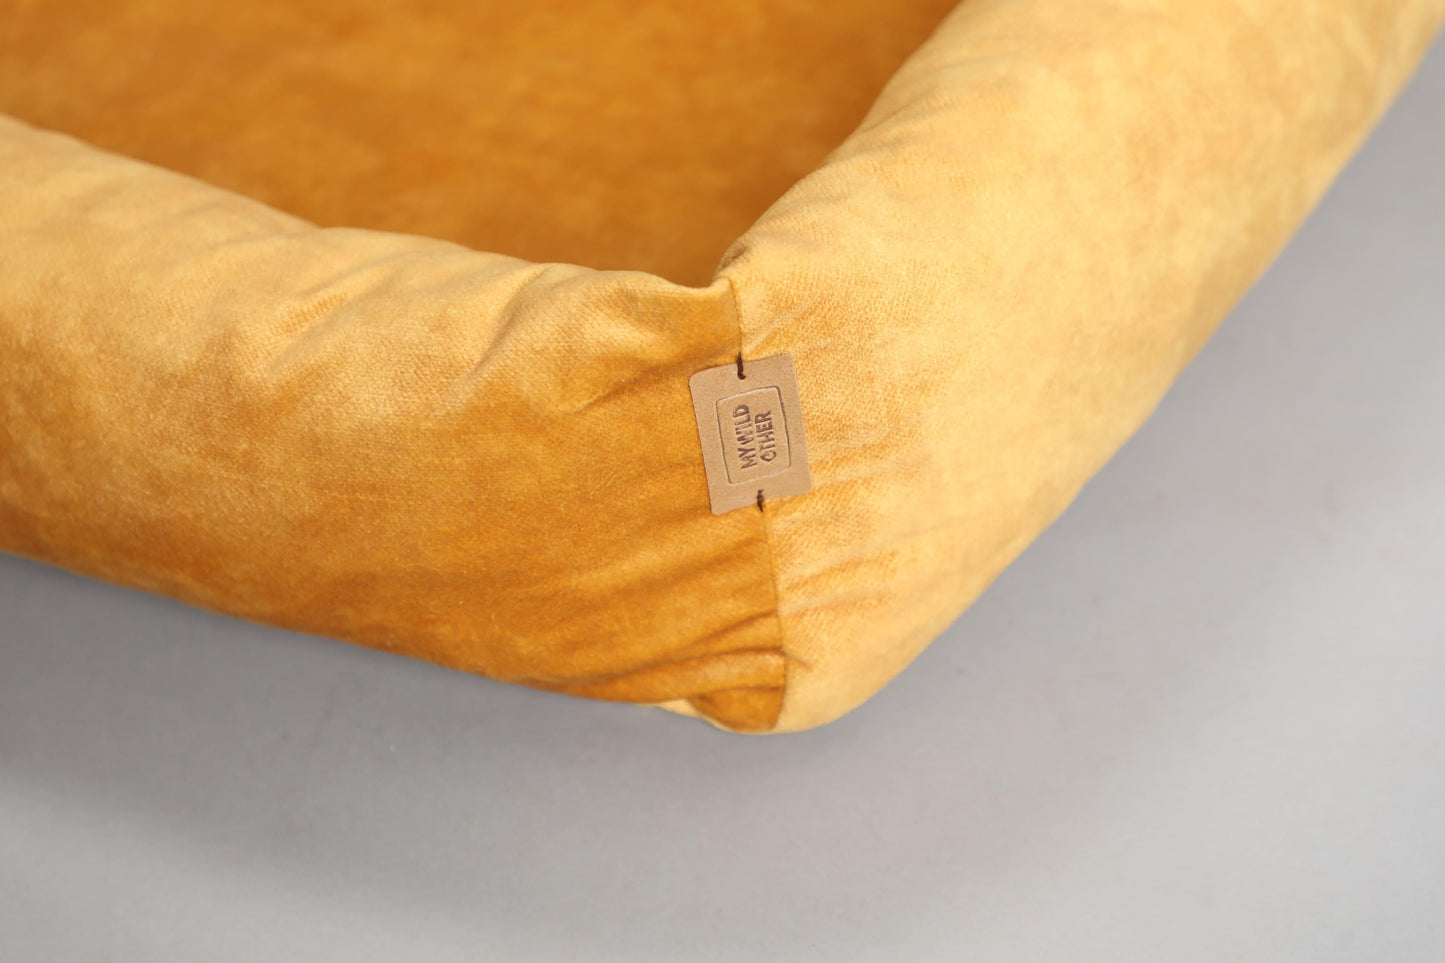 2-sided dog bed with sides. AMBER YELLOW - premium dog goods handmade in Europe by My Wild Other